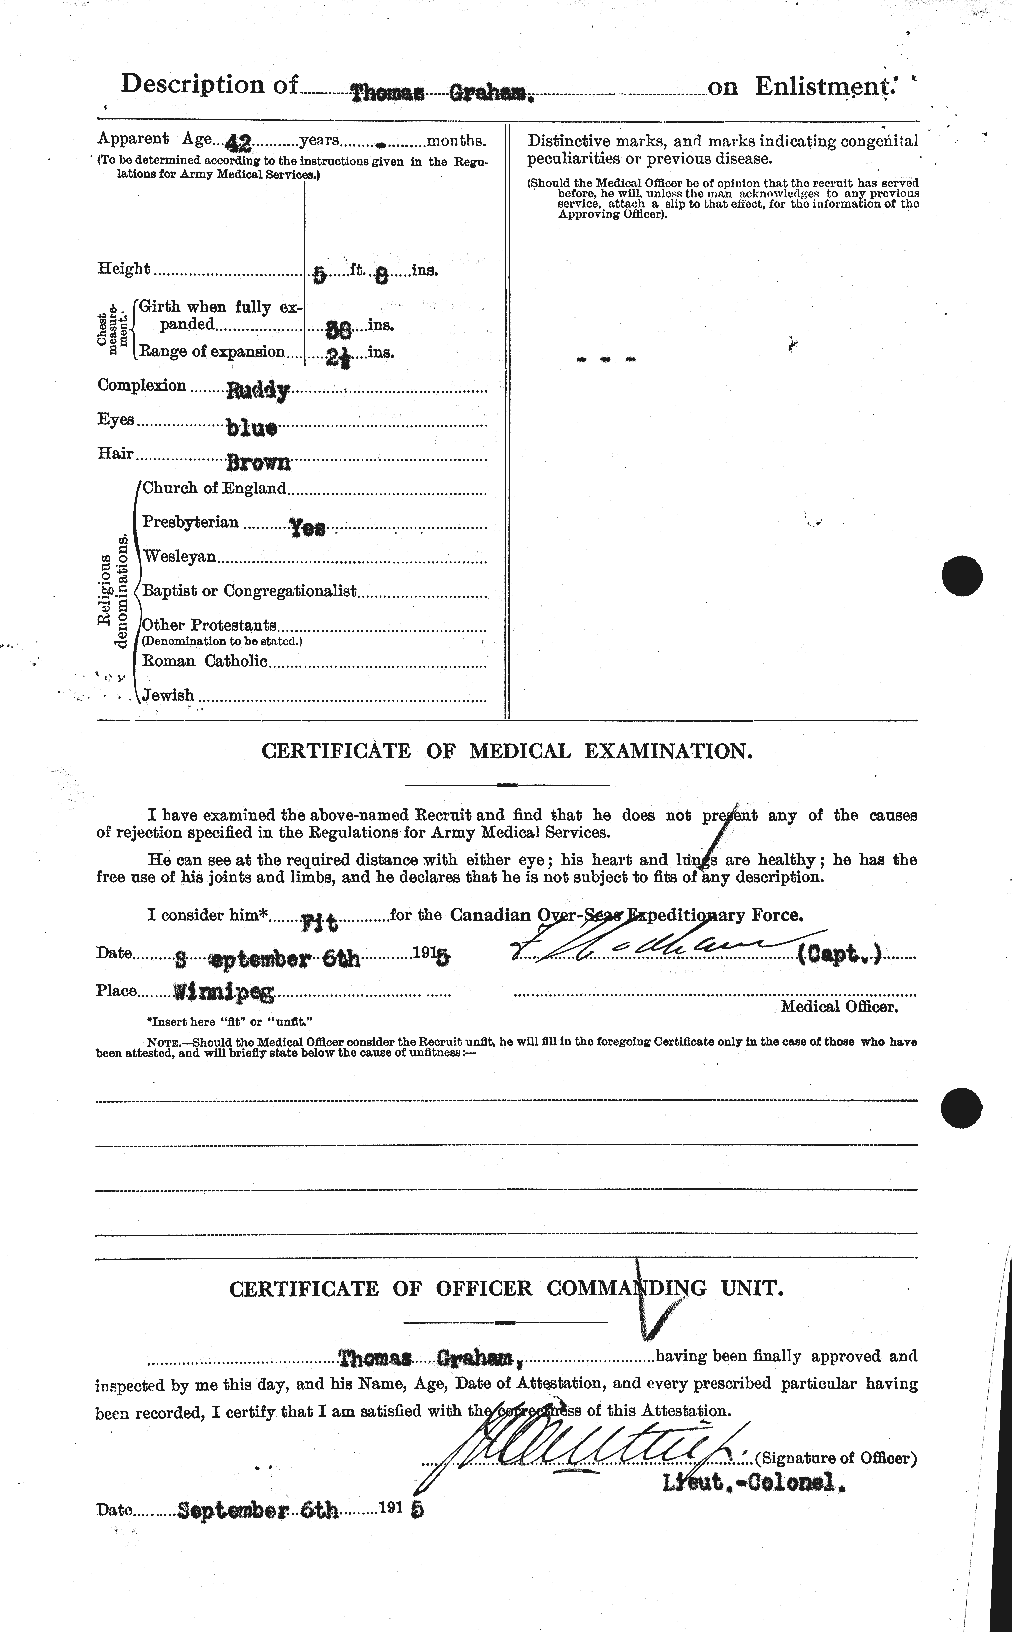 Personnel Records of the First World War - CEF 359492b